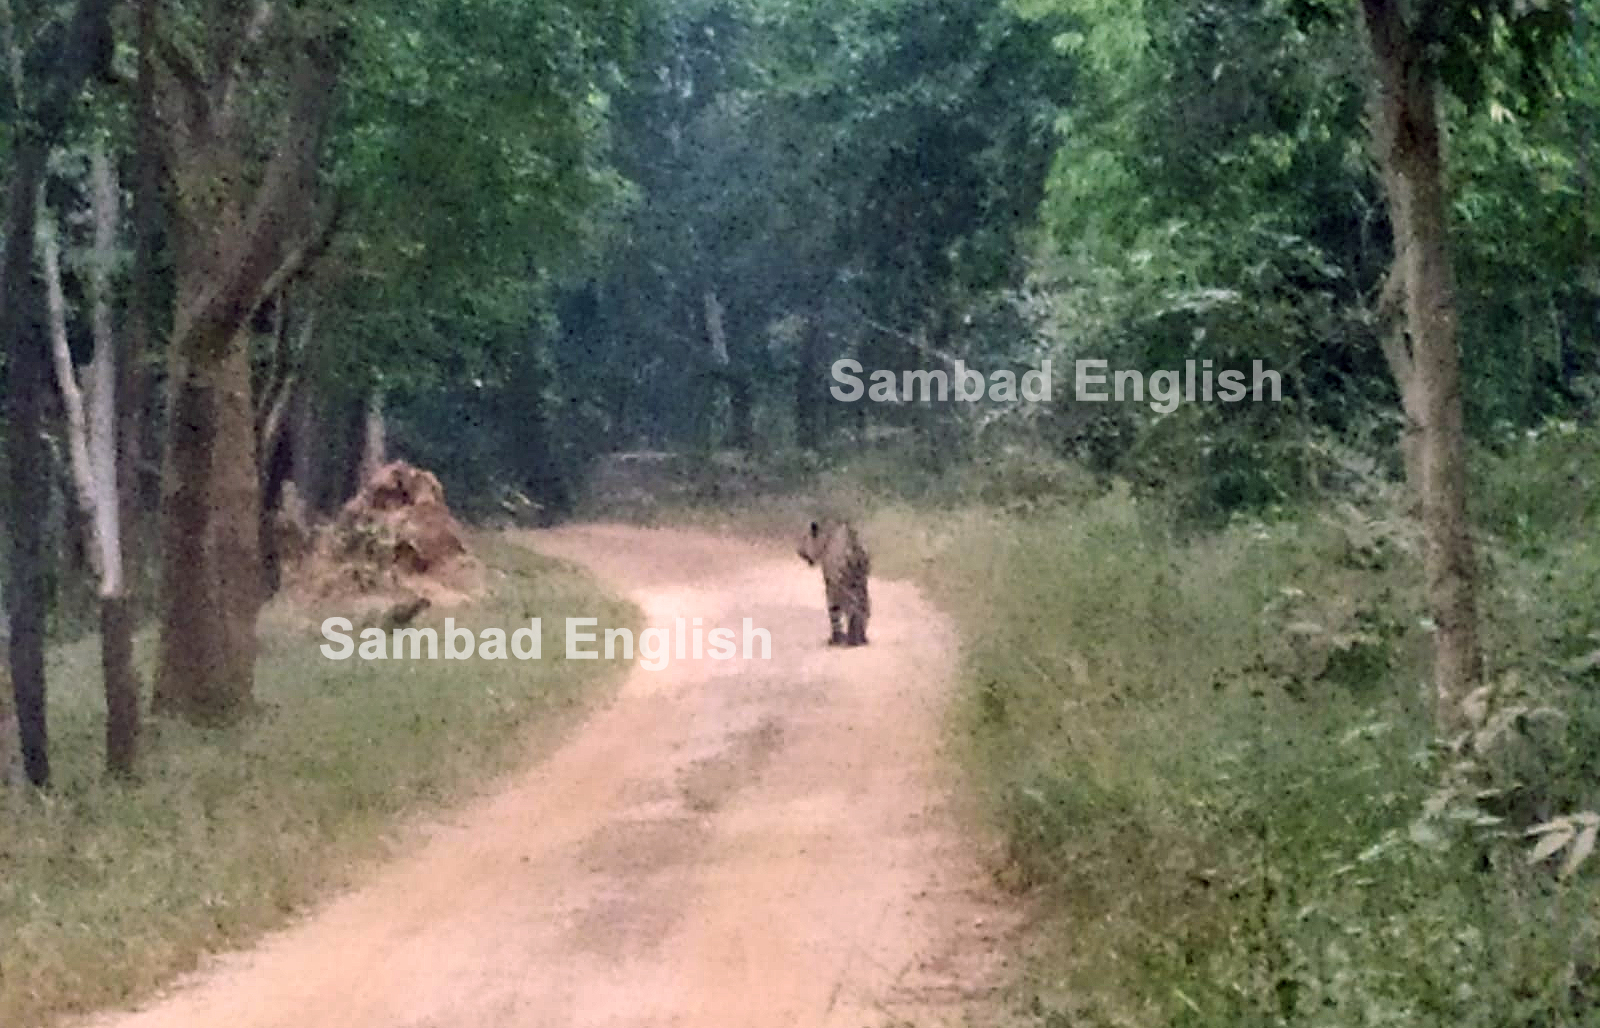 Royal Bengal Tiger spotted in Debrigarh Wildlife Sanctuary near entry gate